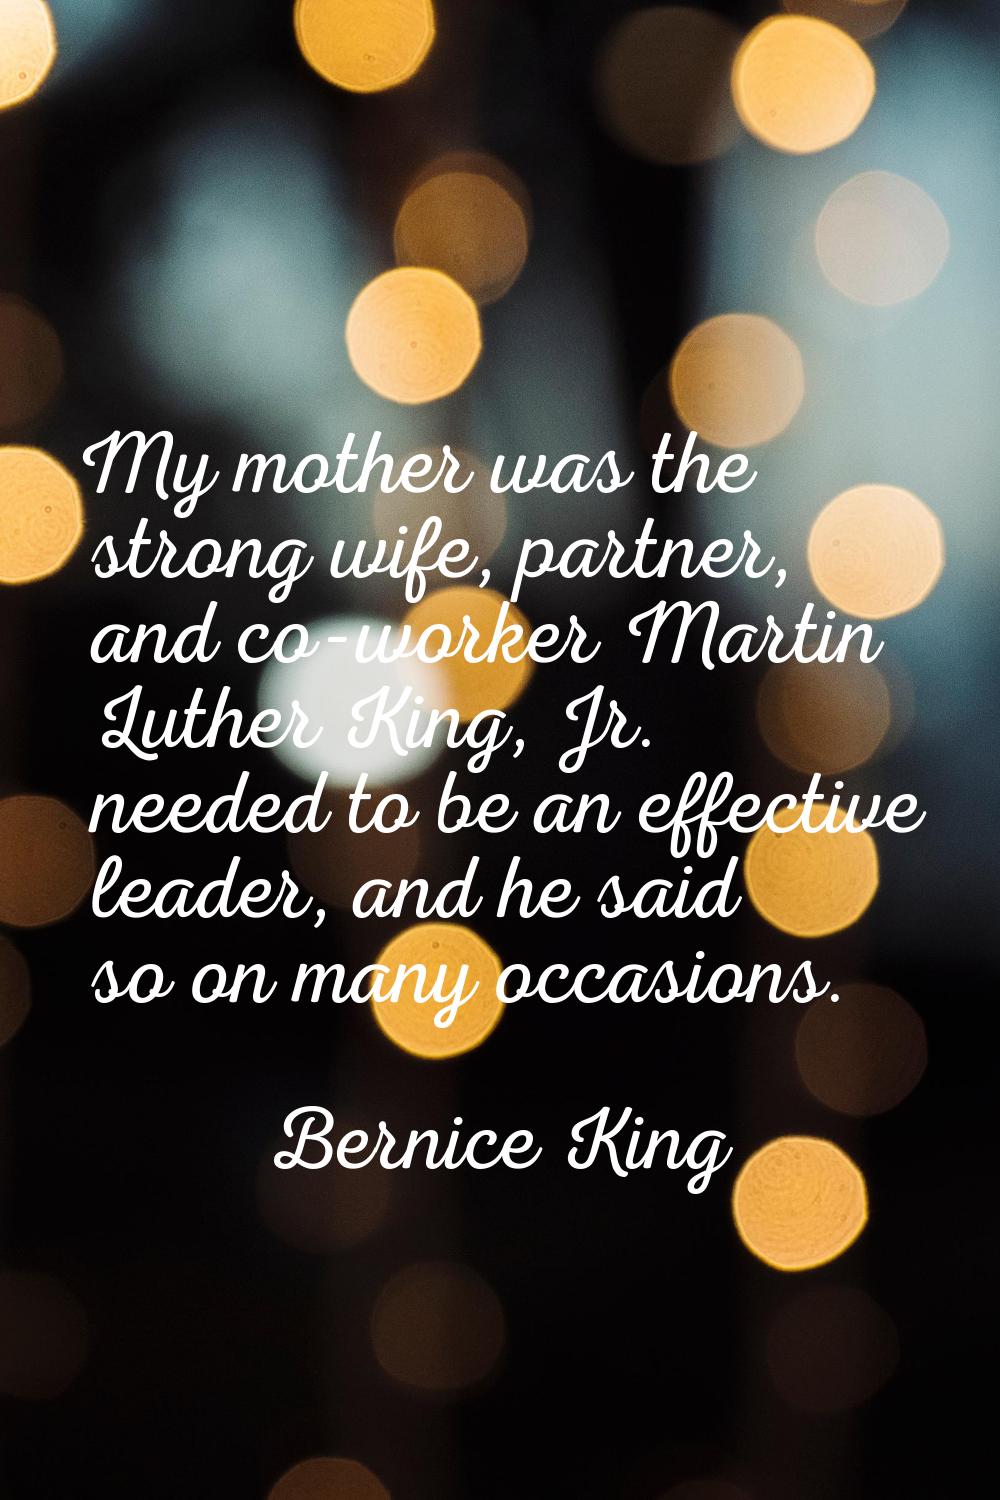 My mother was the strong wife, partner, and co-worker Martin Luther King, Jr. needed to be an effec